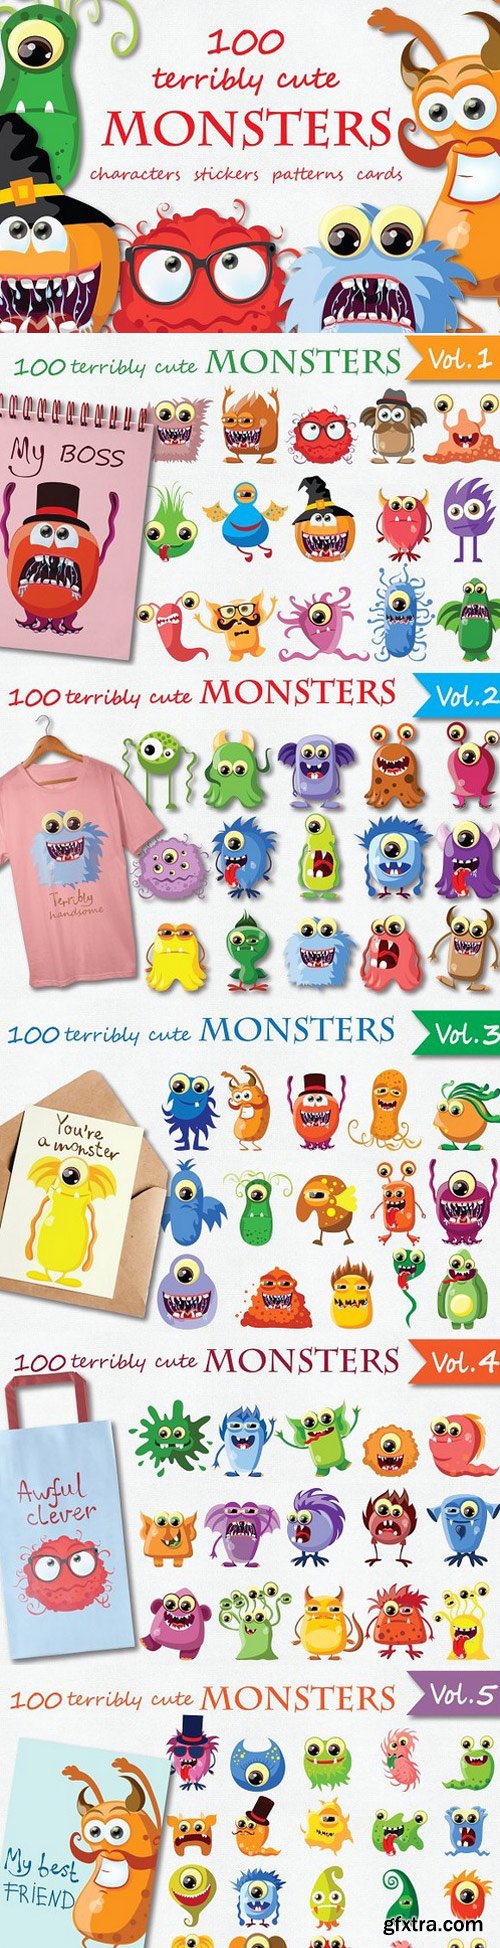 CM - 100 terribly cute MONSTERS 1215285